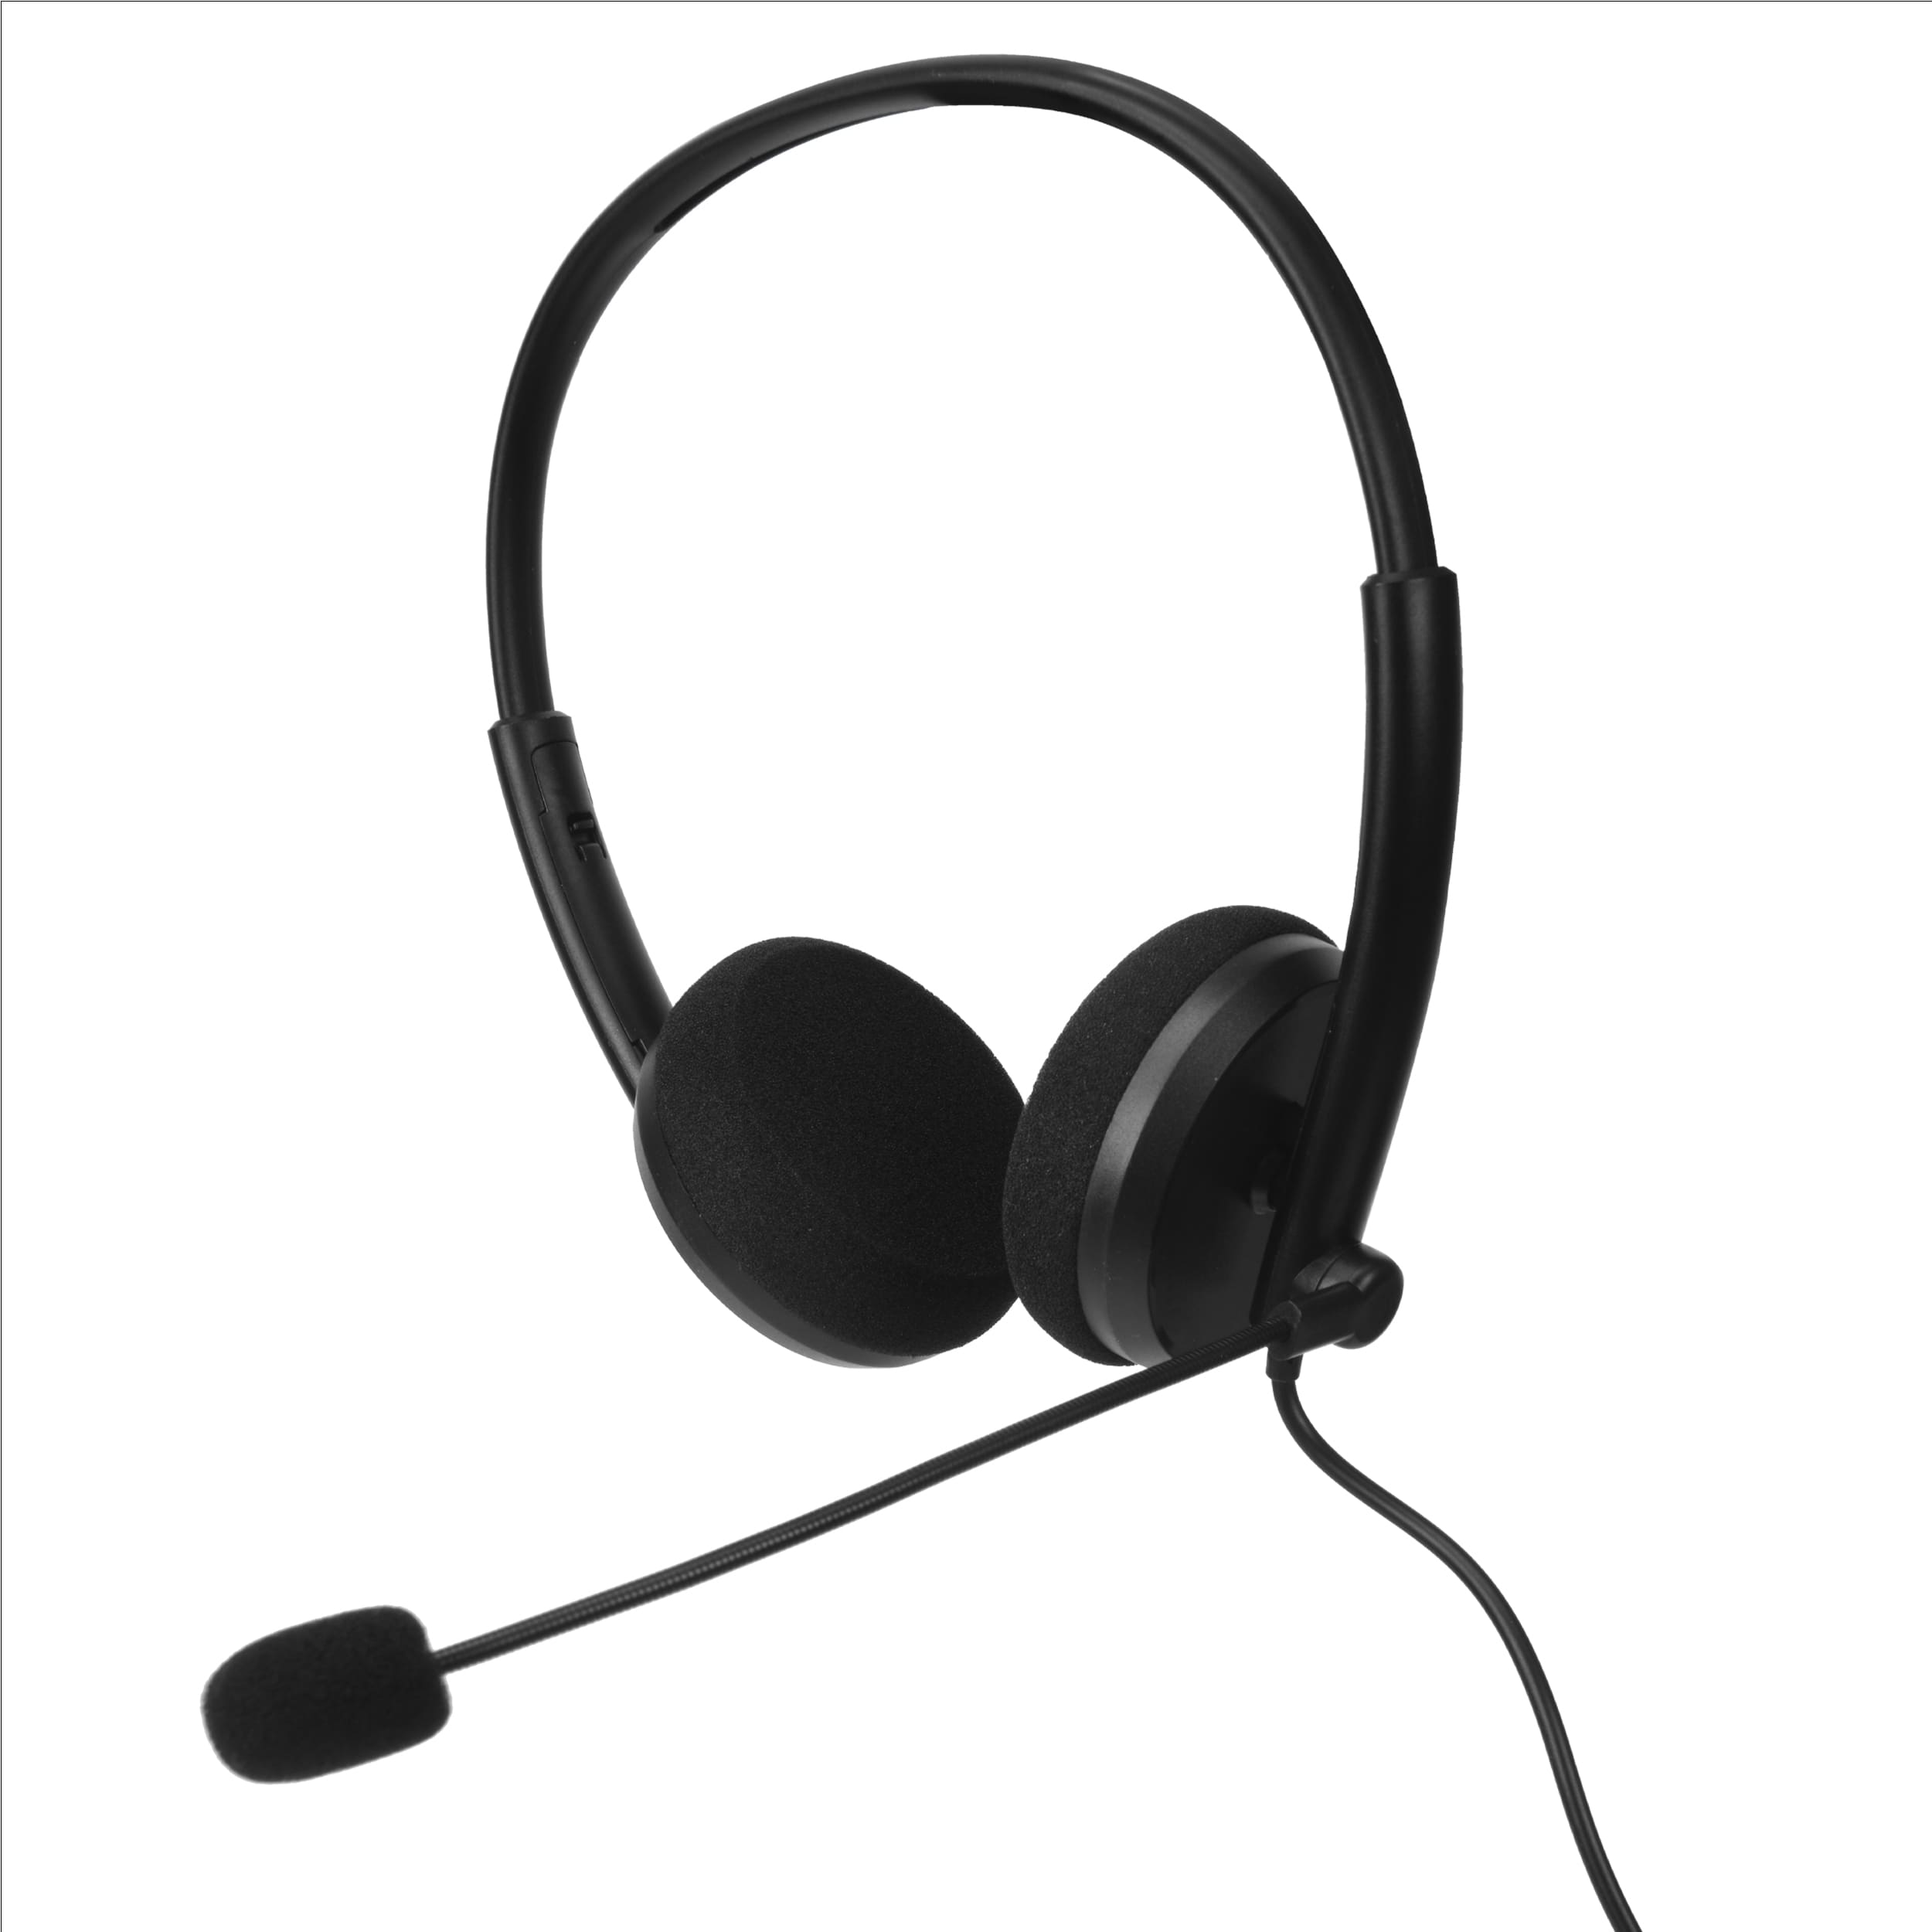 LAPCARE SUPER BASS STEREO HEADSET WITH MIC LWS-003